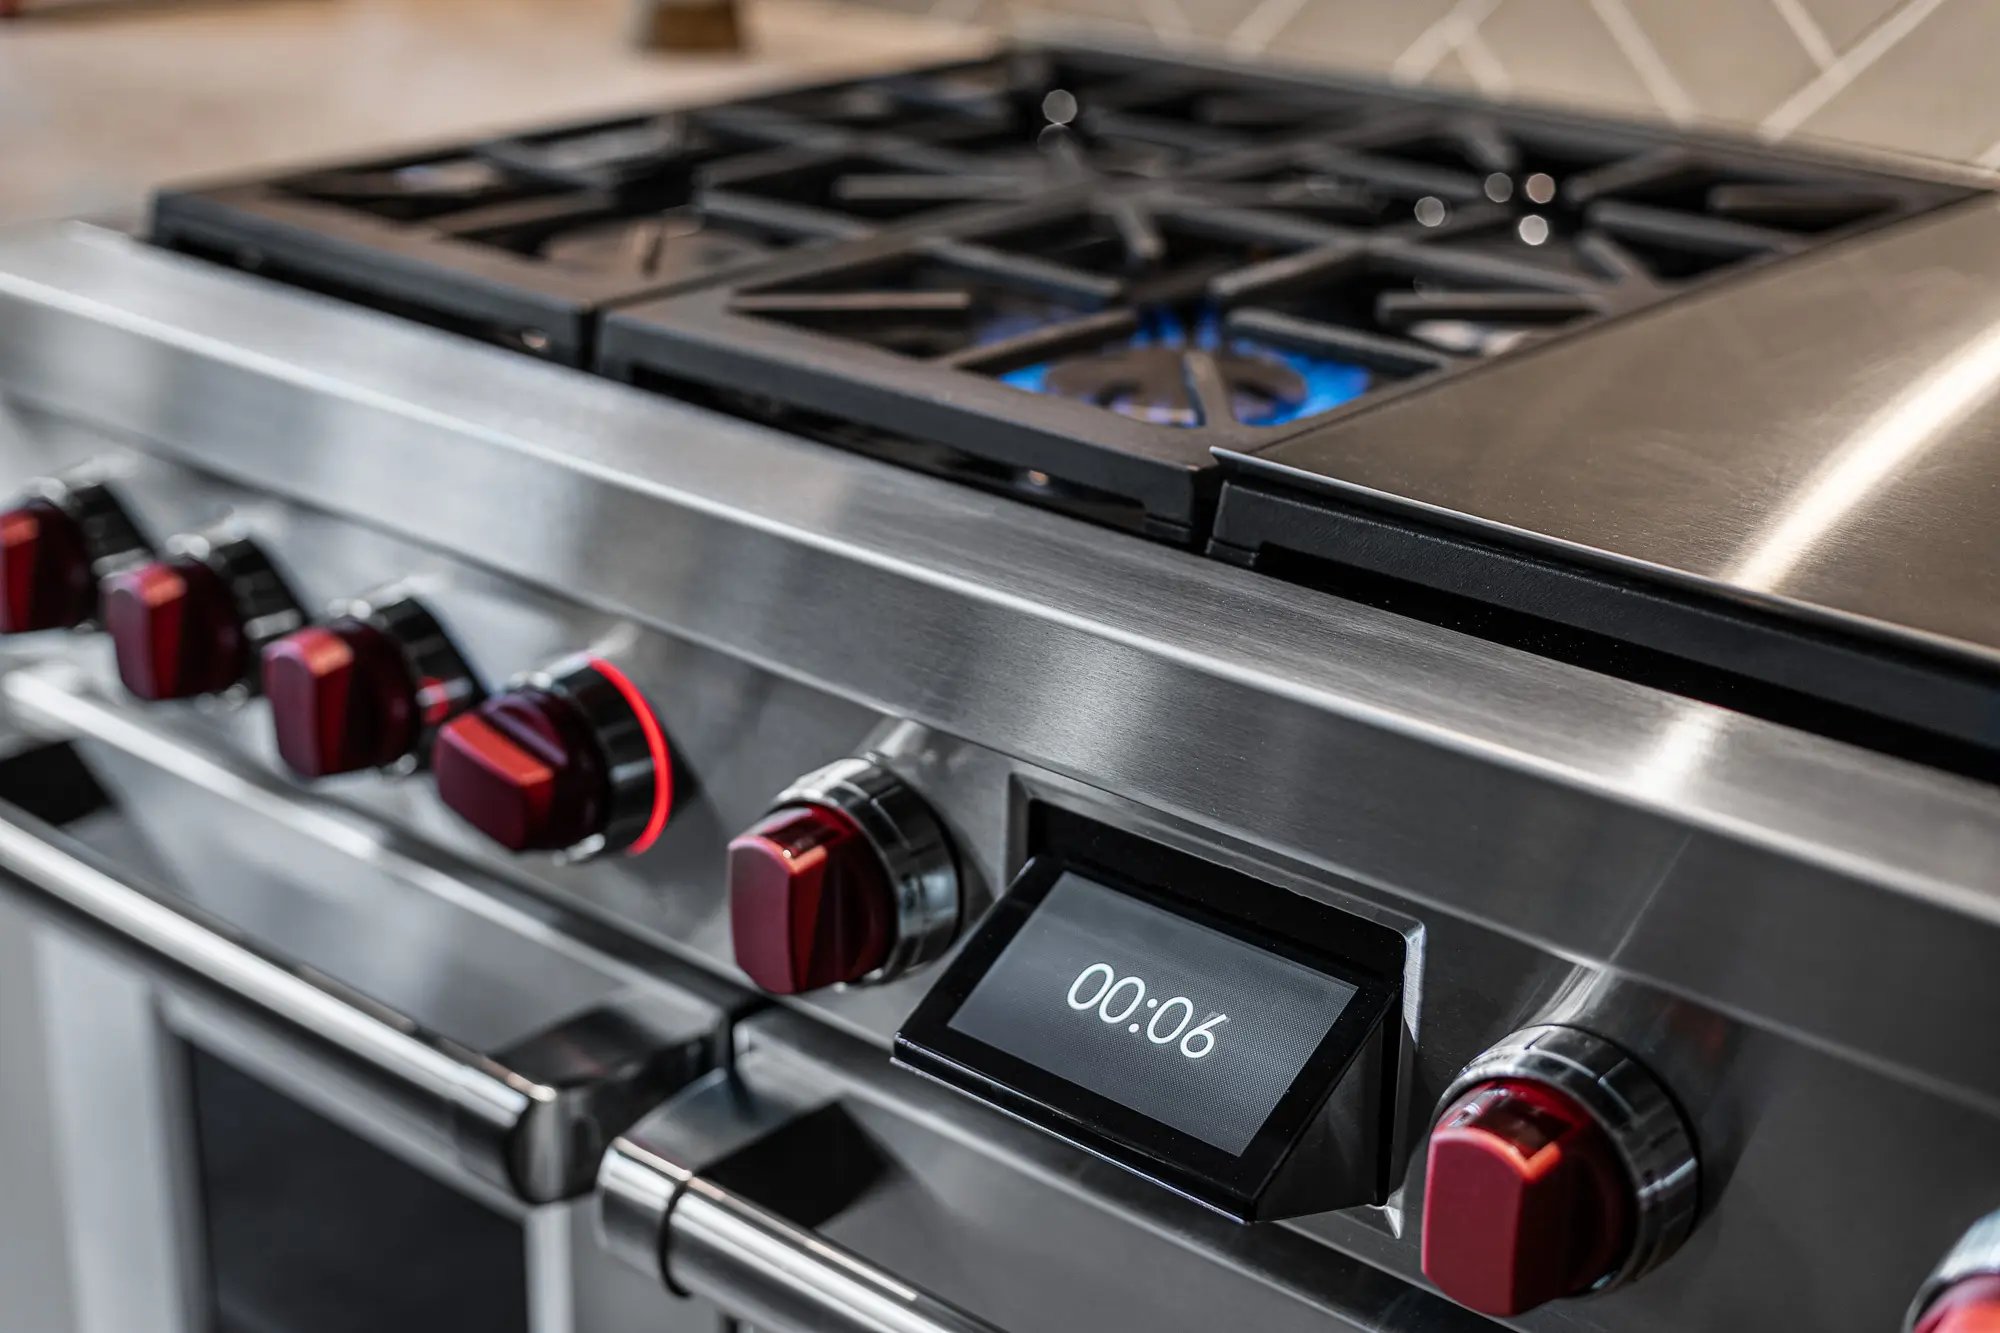  Close-up of a stainless steel gas stove with red control knobs and digital timer display, showcasing modern kitchen appliances.